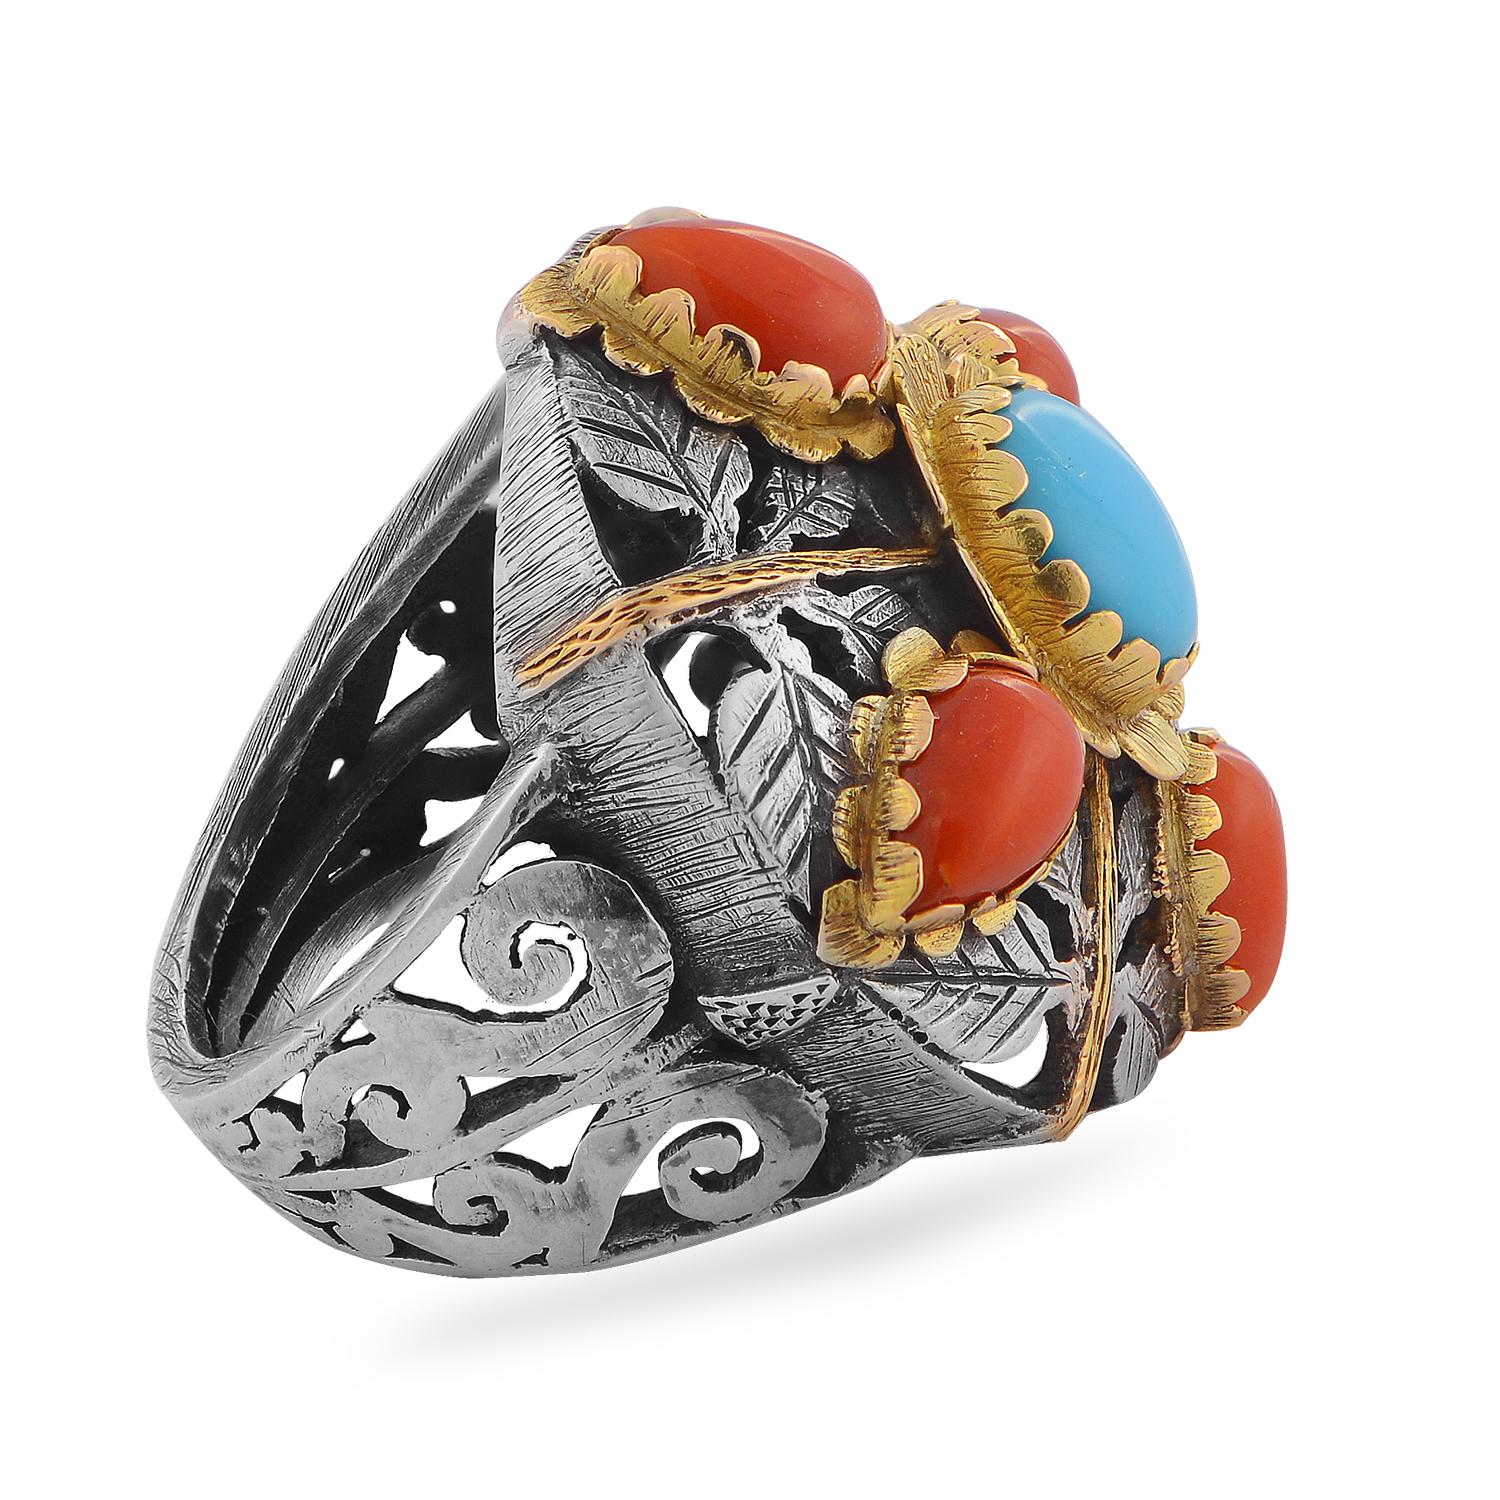 This striking one of a kind ring has been handmade in our workshops. It has intricate hand engraved floral and geometric motifs on it in oxidized sterling silver and 18kt gold.  The ring is embedded with turquoise and corals.

Ring dimensions - 25mm